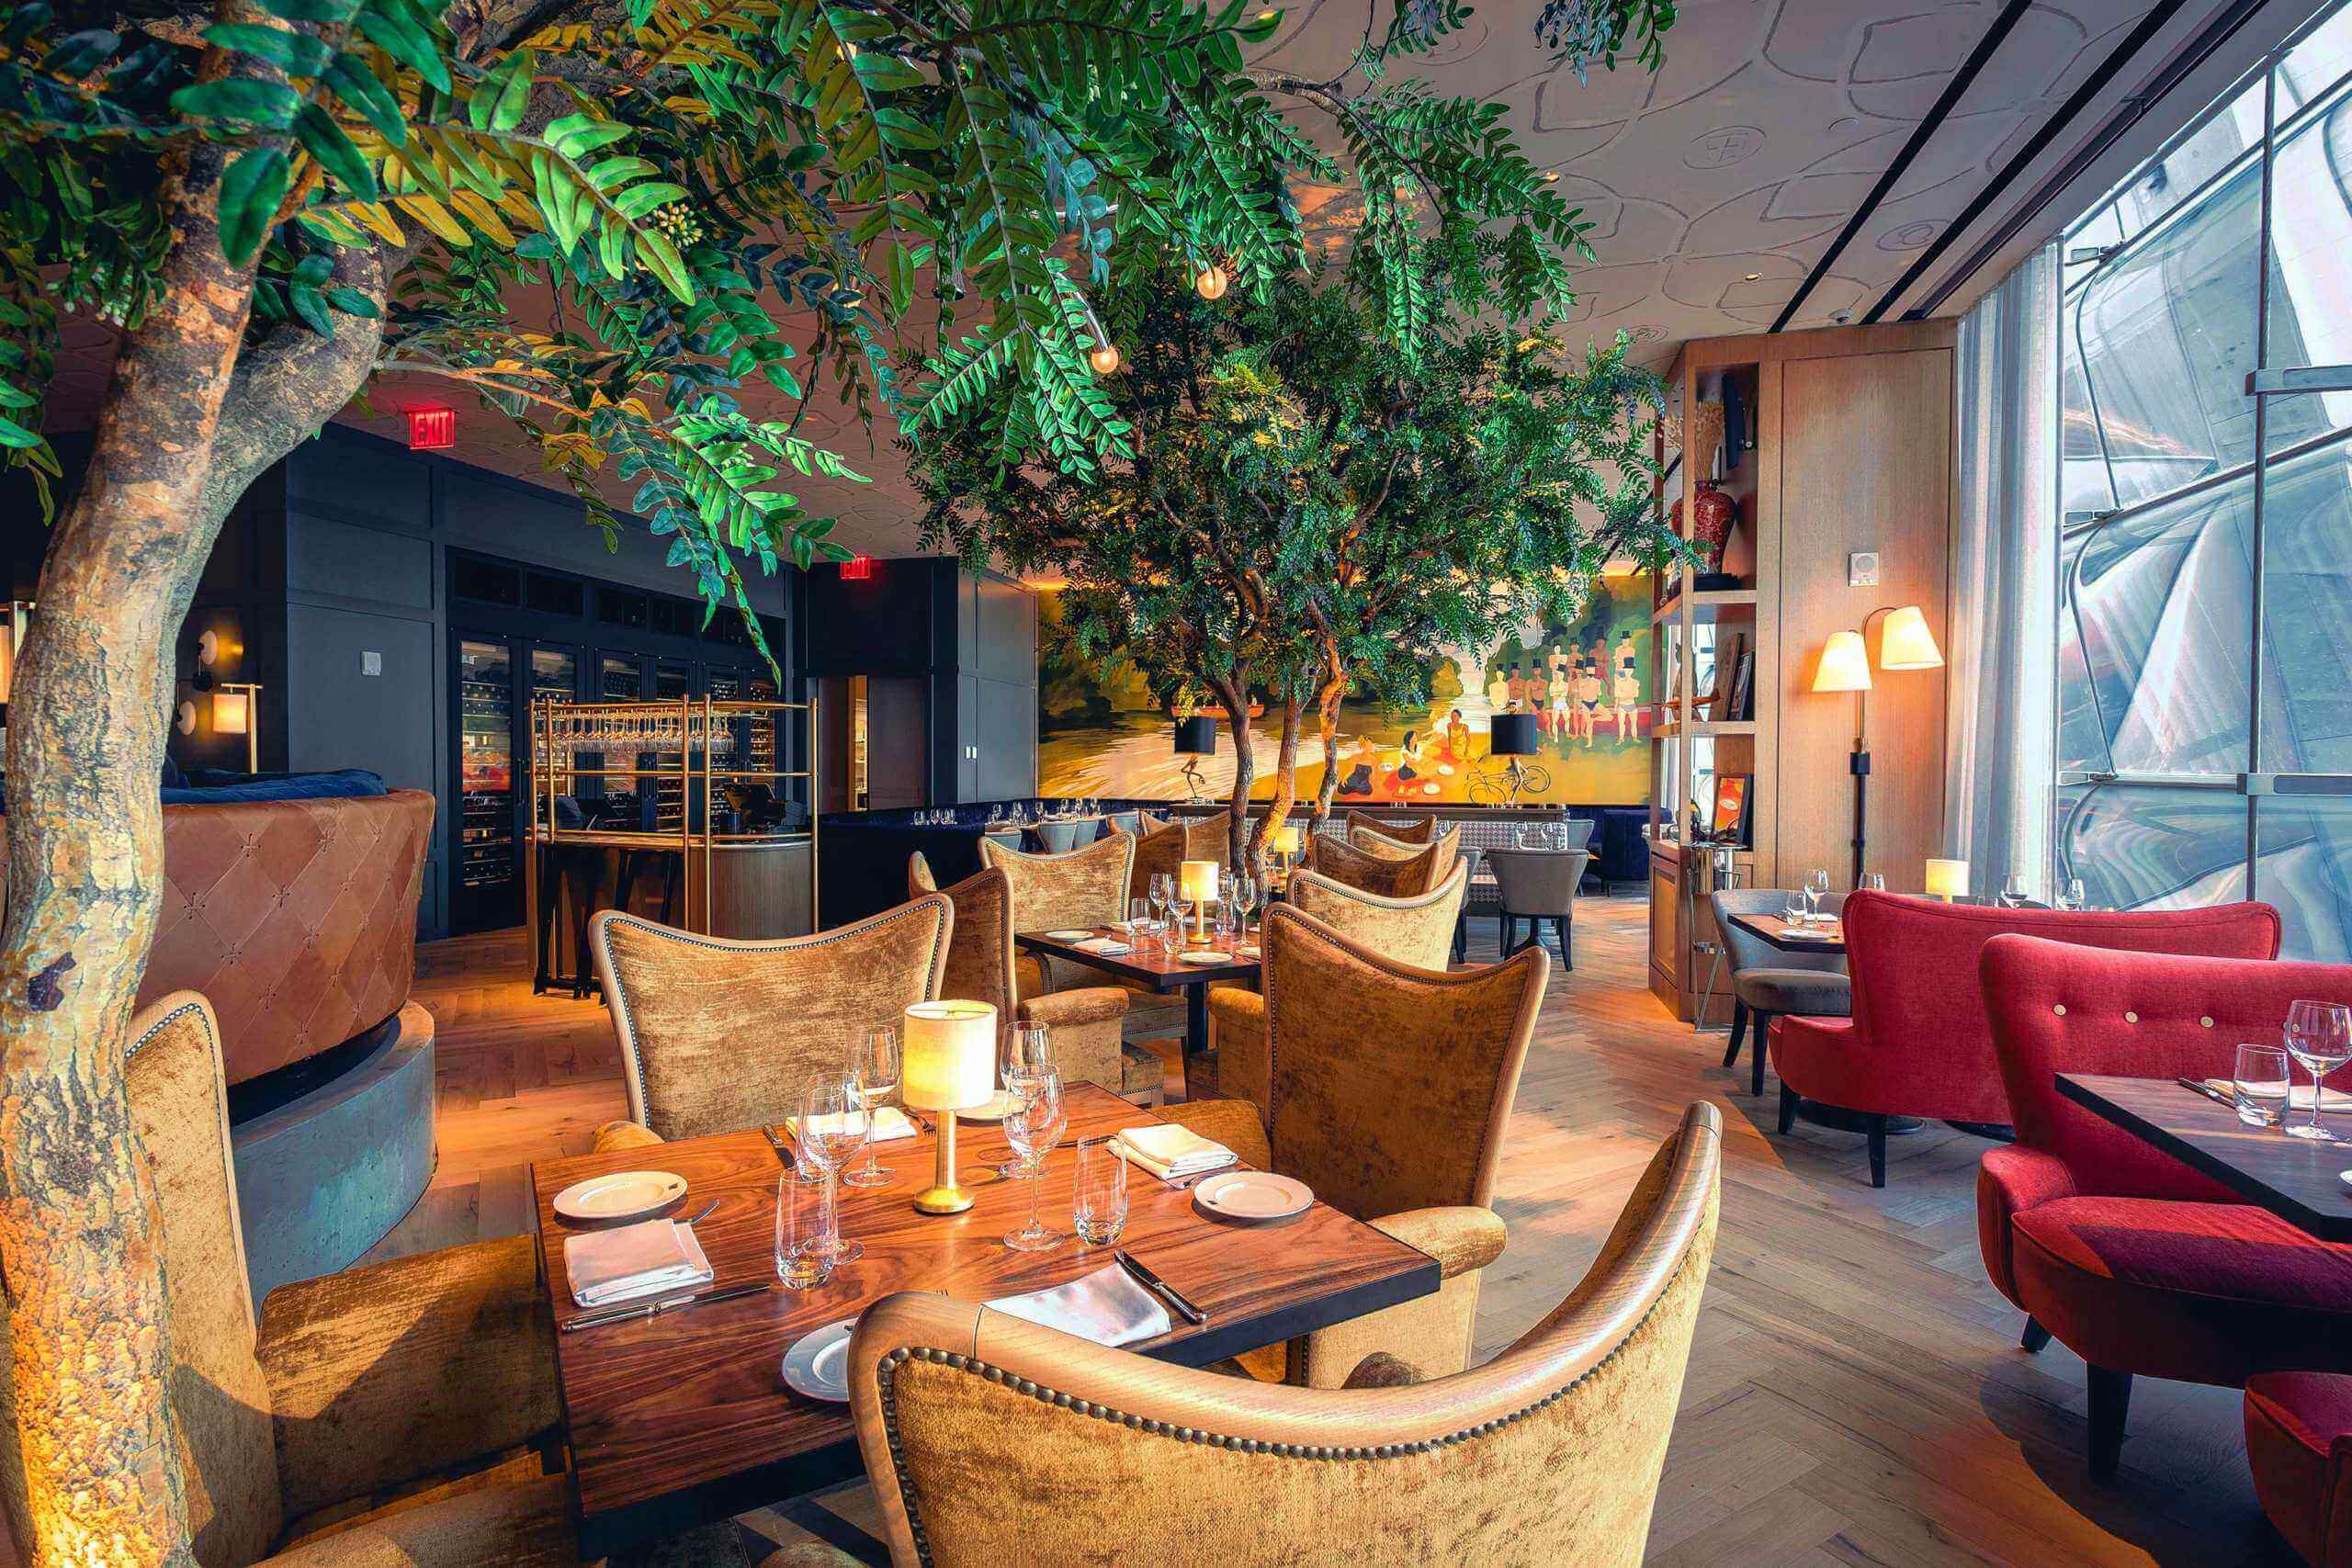 Lower angle view of Artificial indoor Acacia trees in Queensyard Restaurant in New York